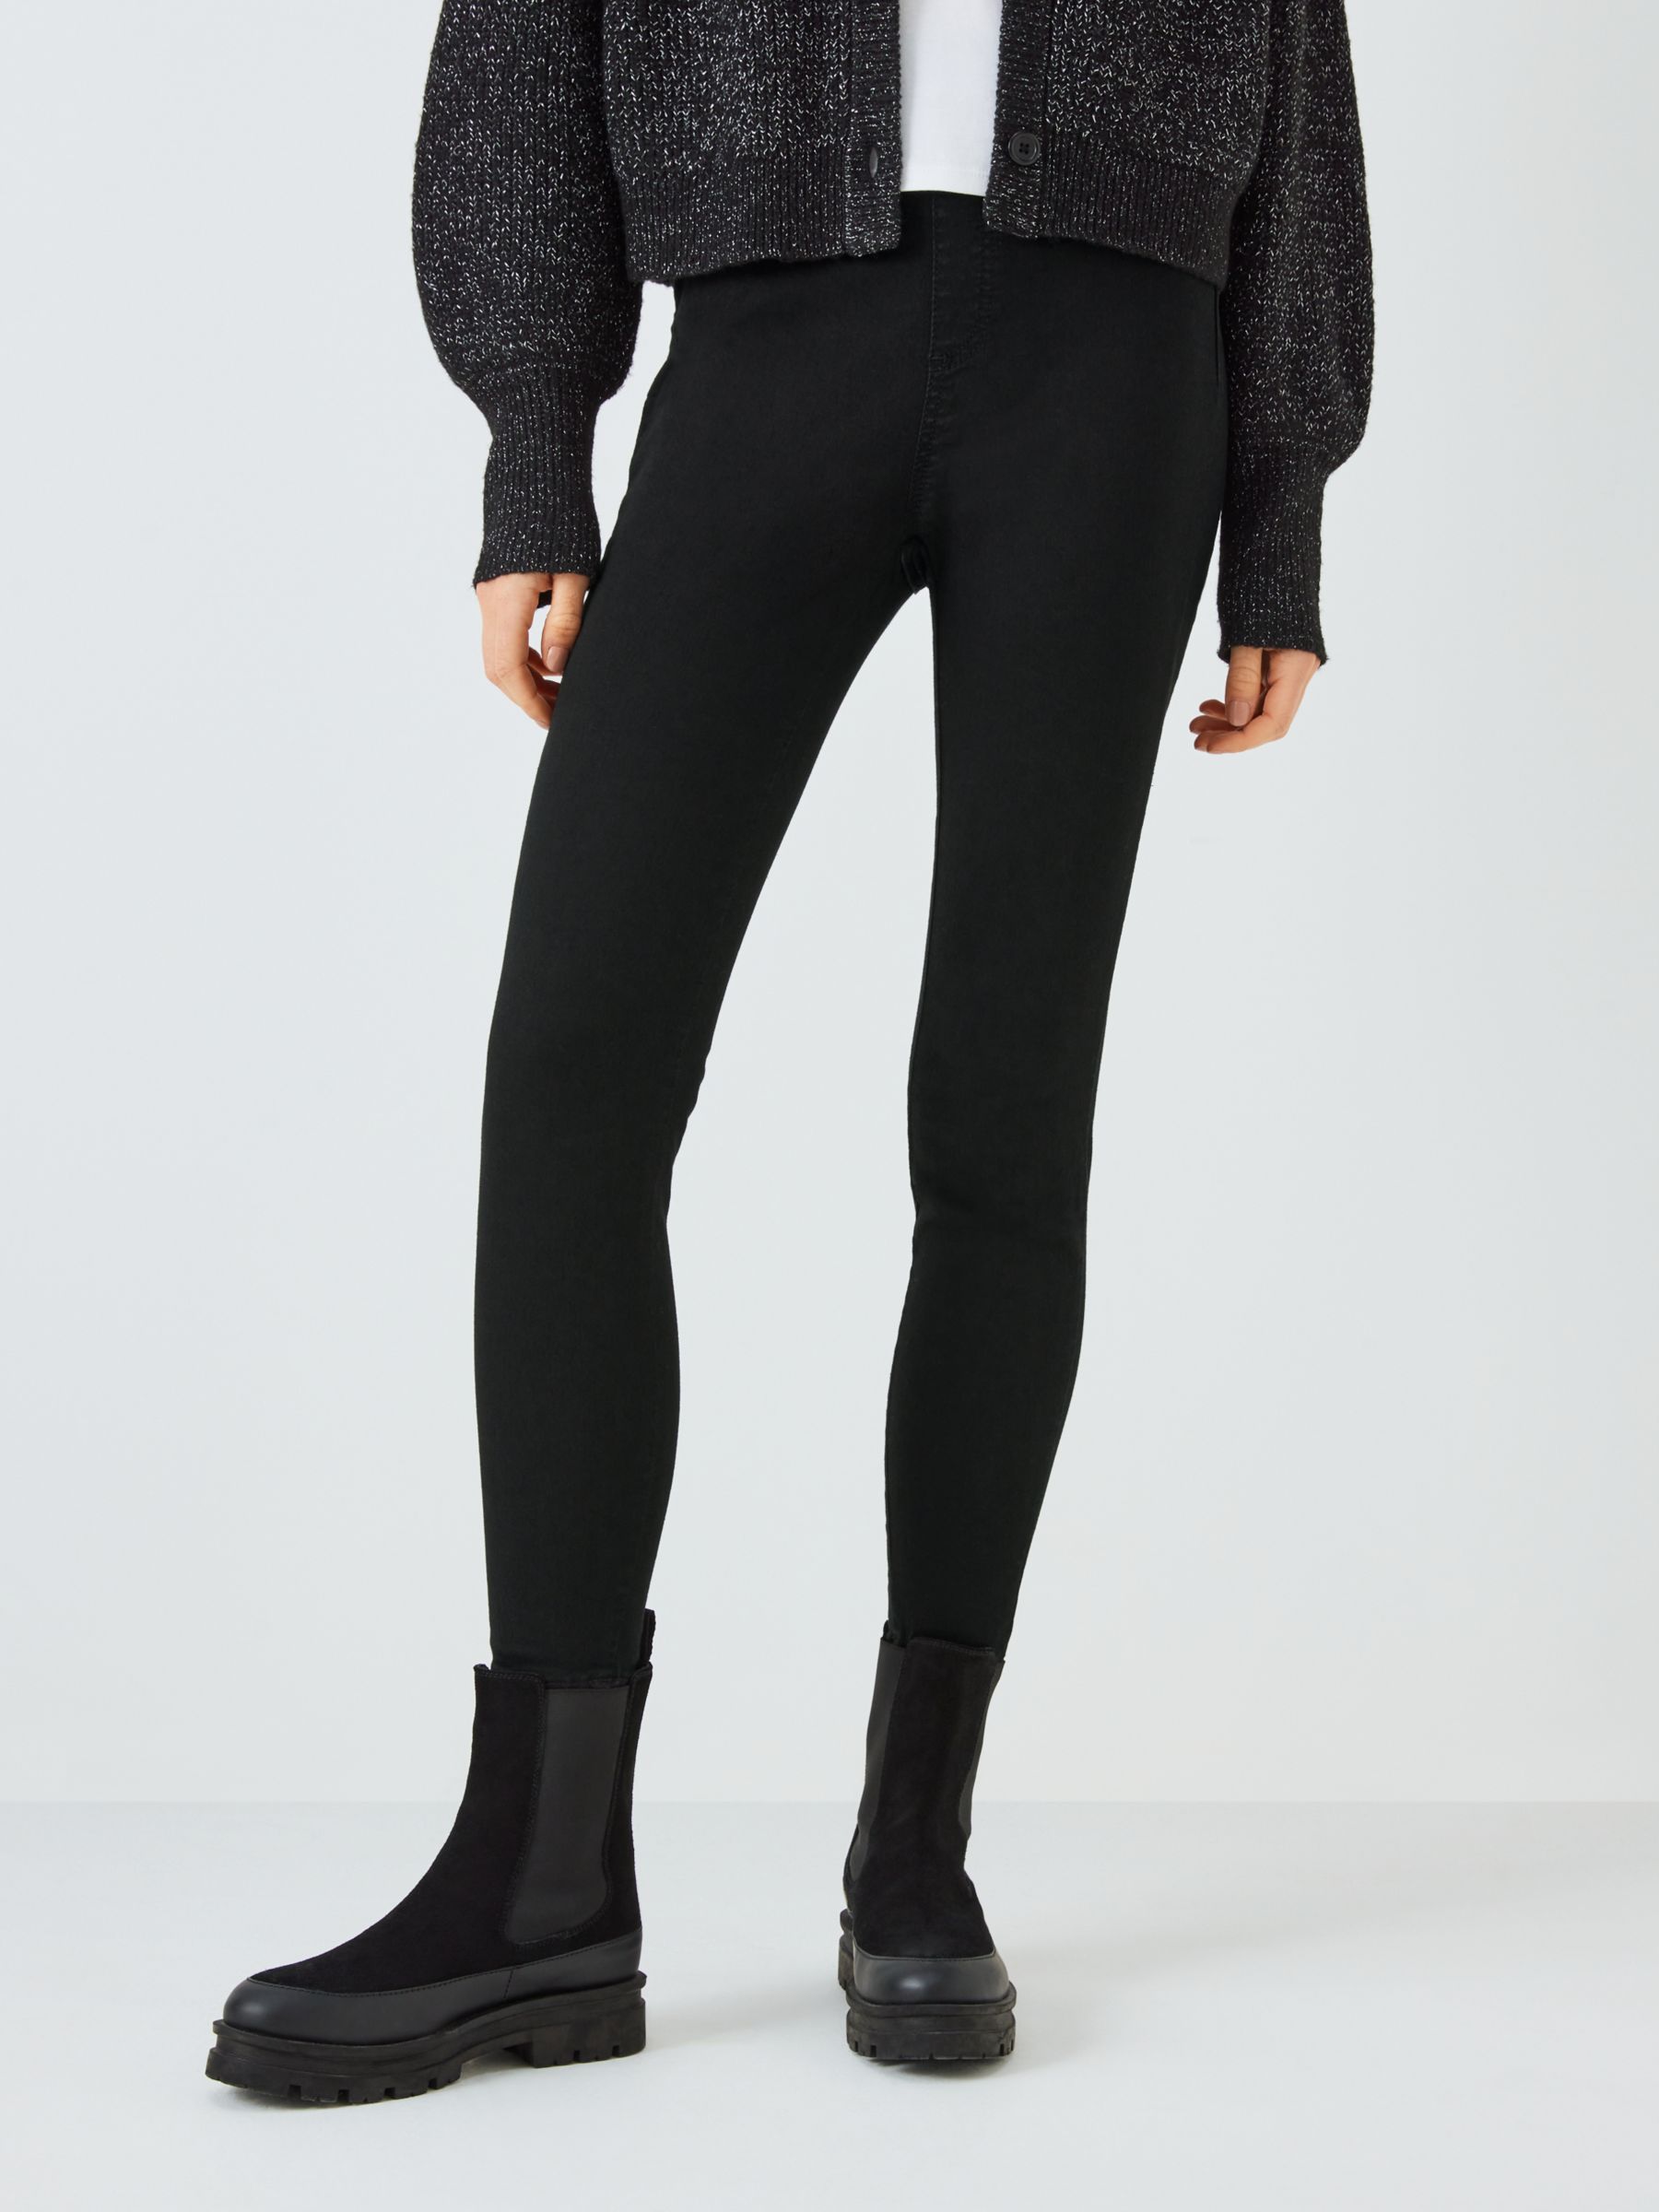 Jeans & Trousers, Marks And Spencer Black Jeggings